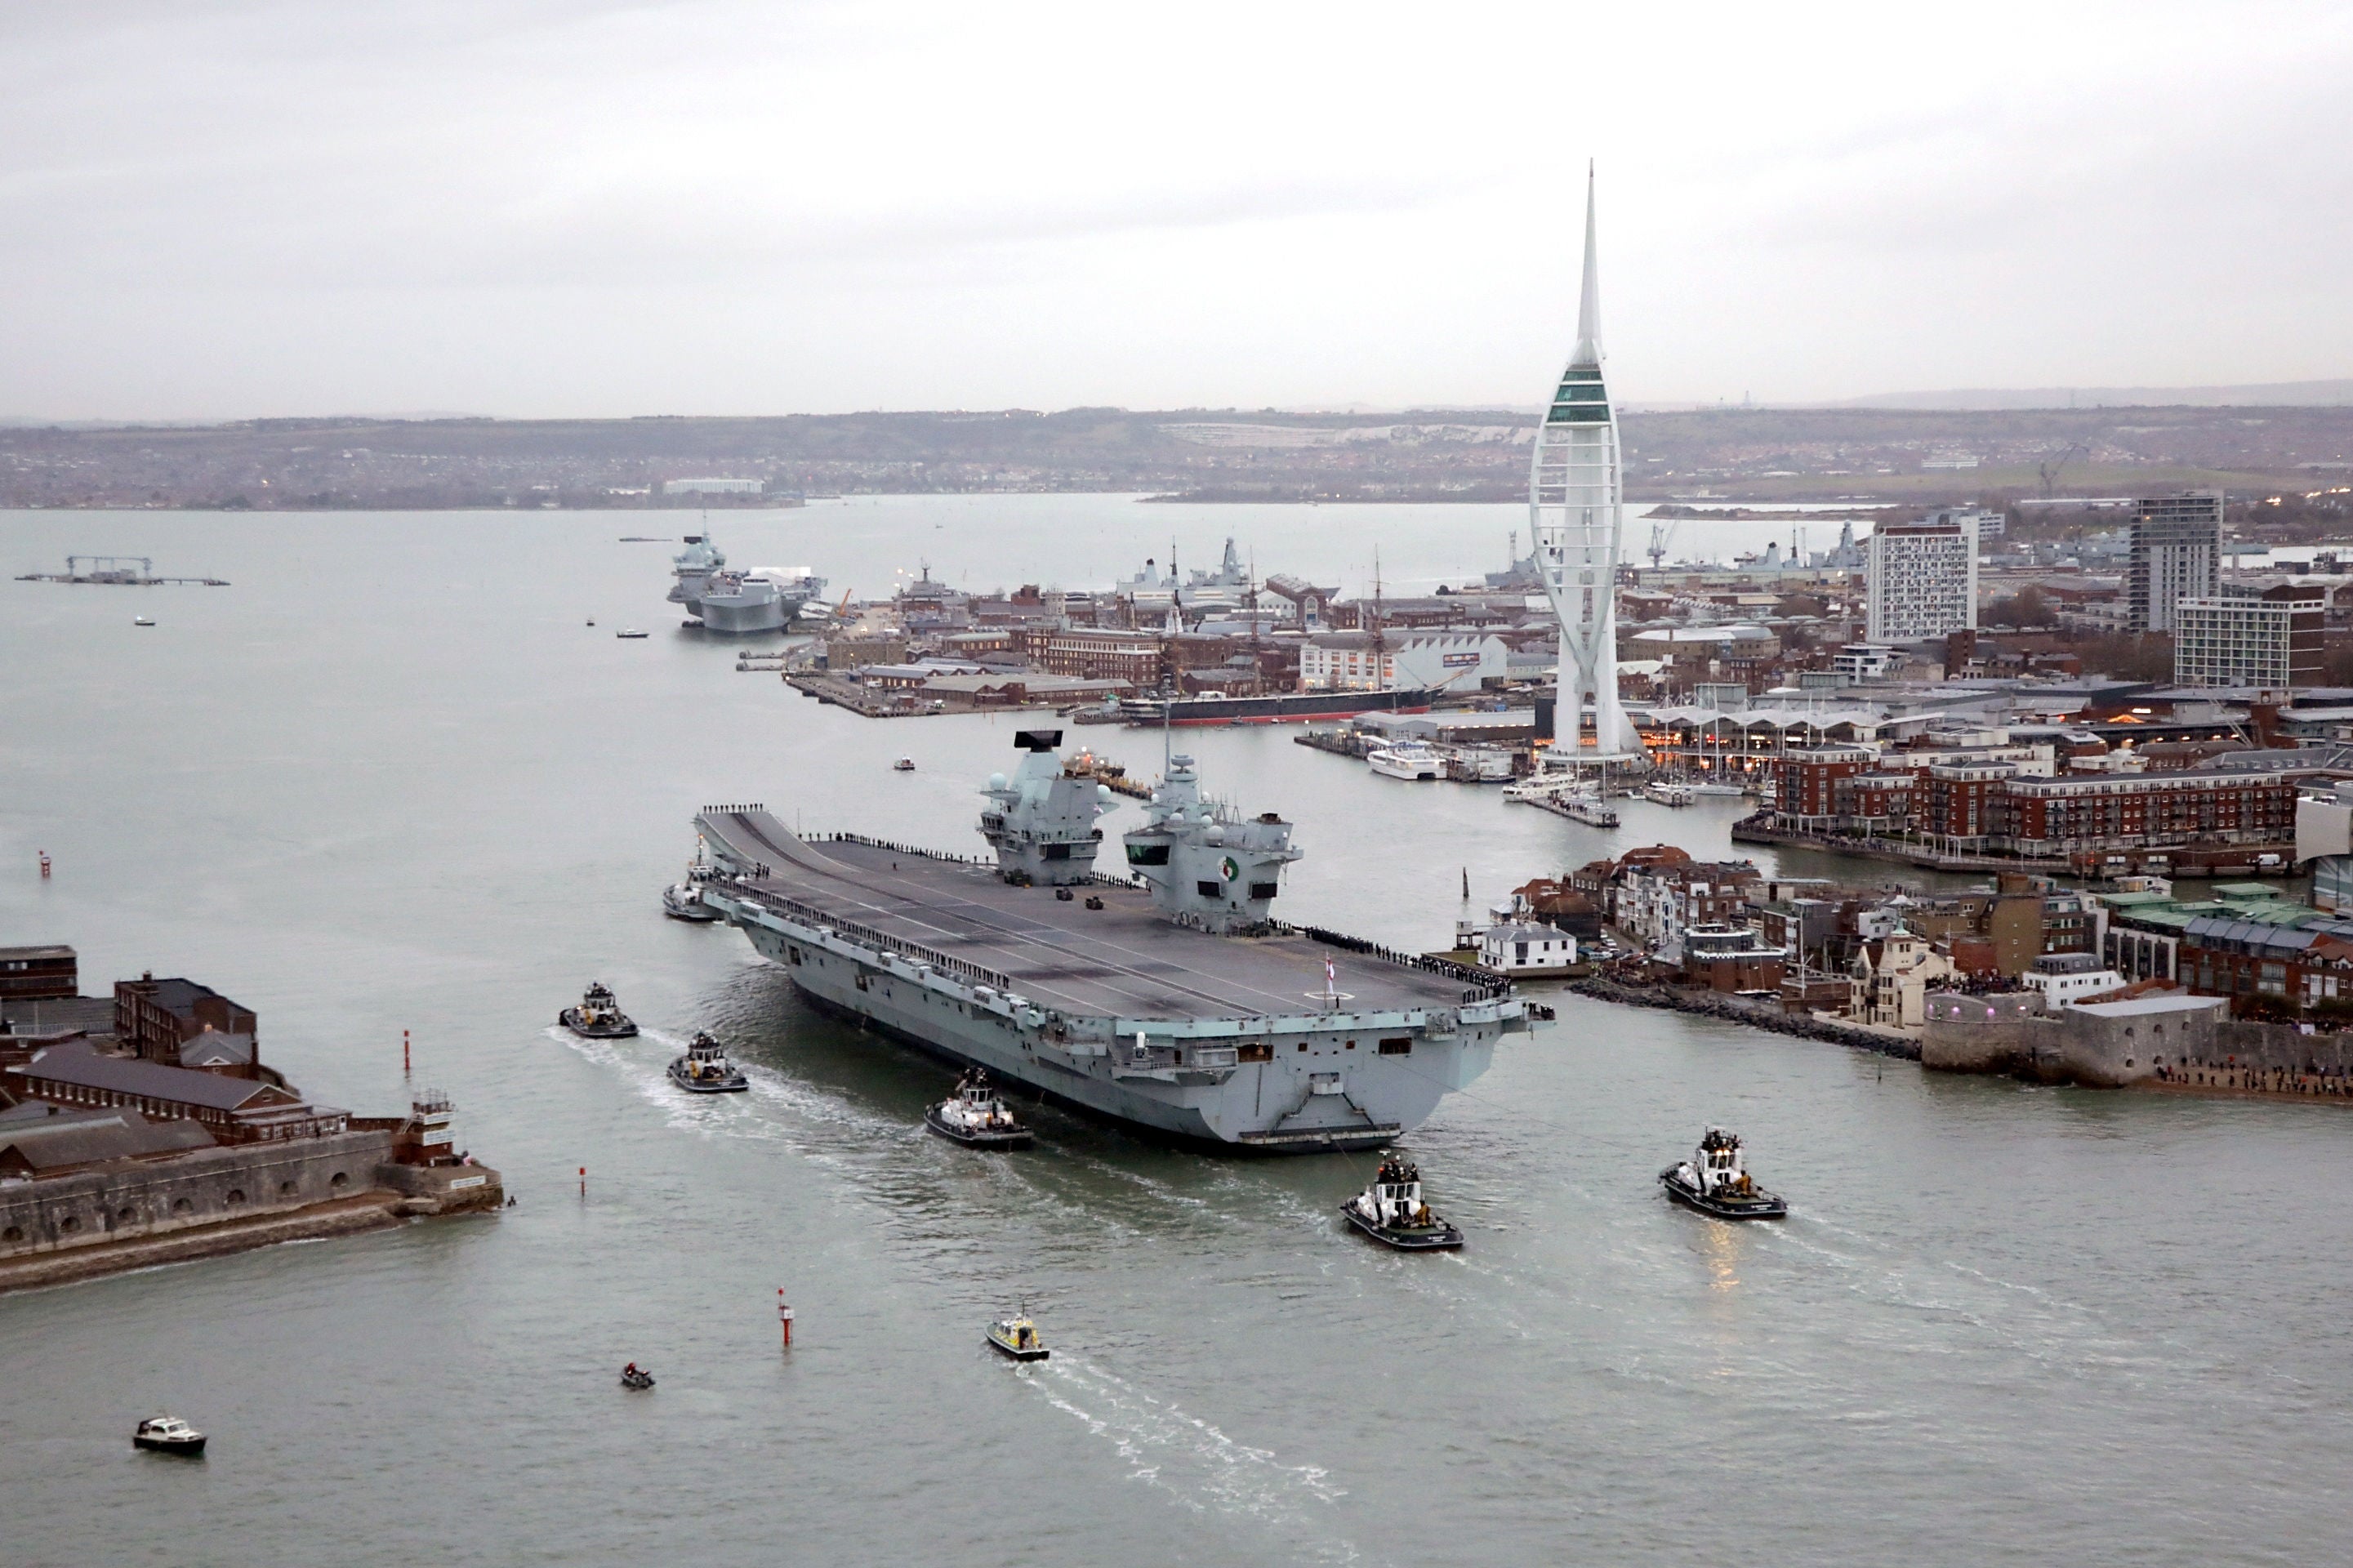 HMS Queen Elizabeth returning to Portsmouth Naval Base at the end of her global seven month maiden operational deployment